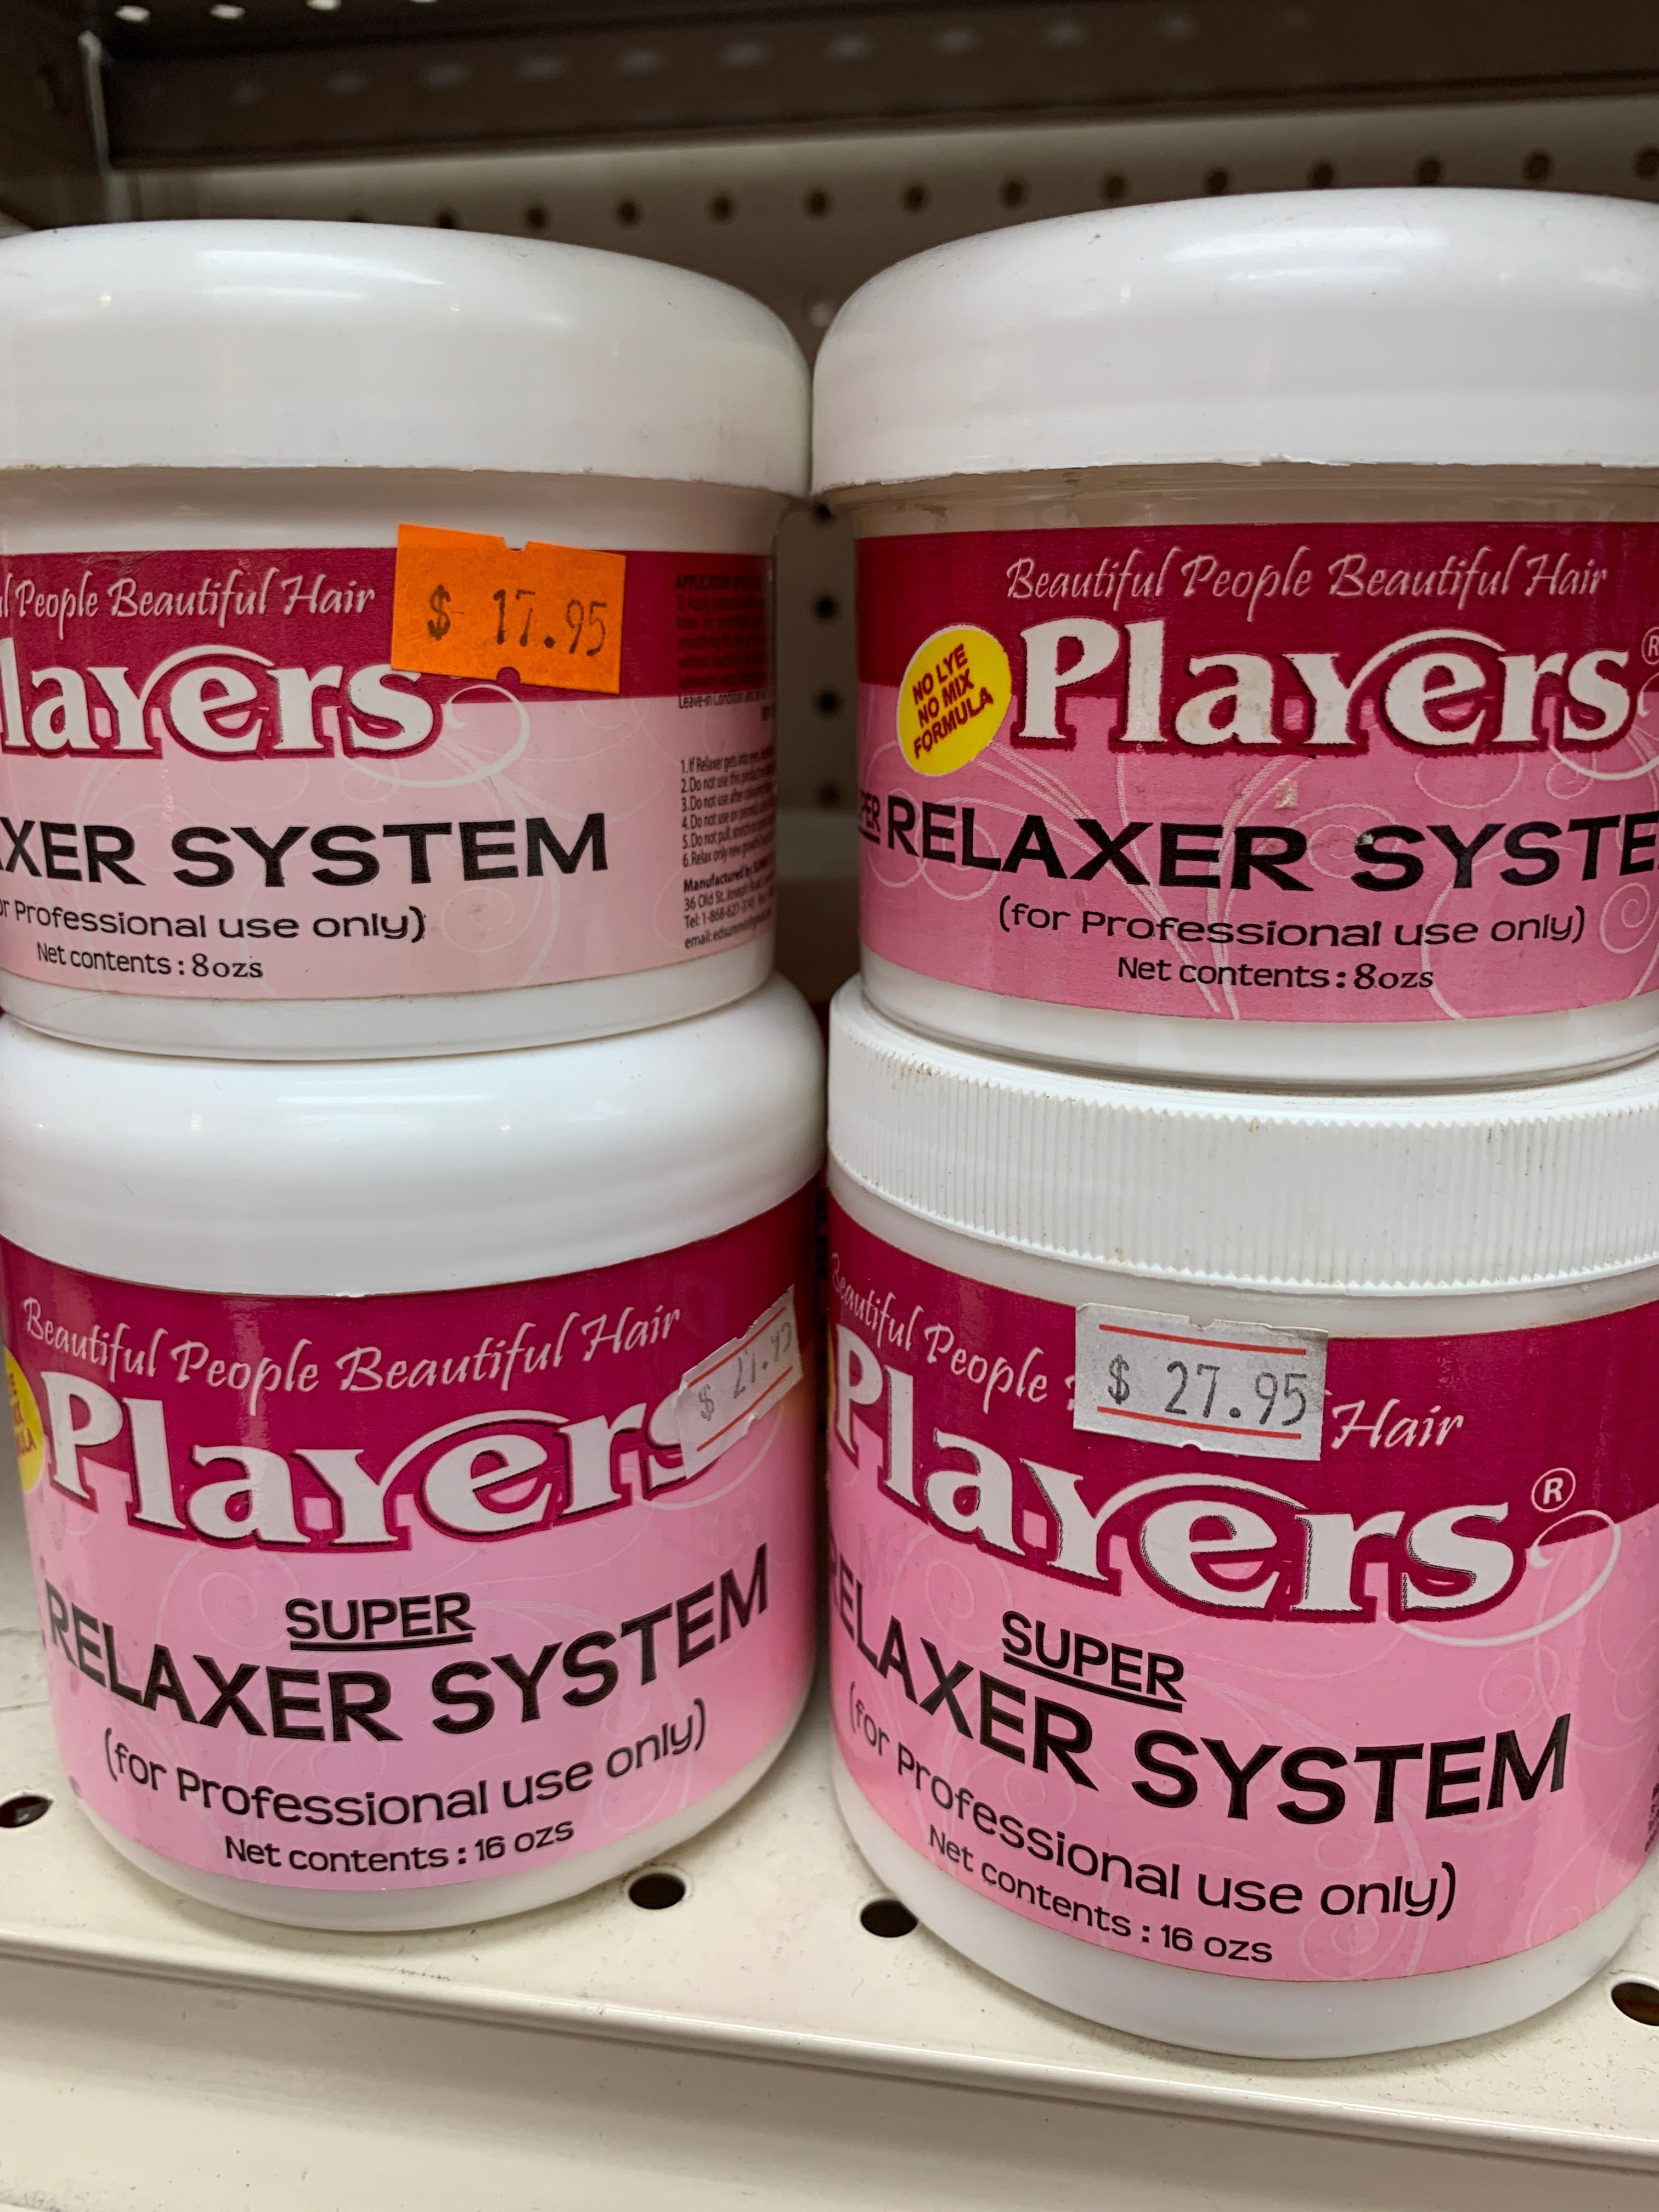 Players relaxer system super8/16oz